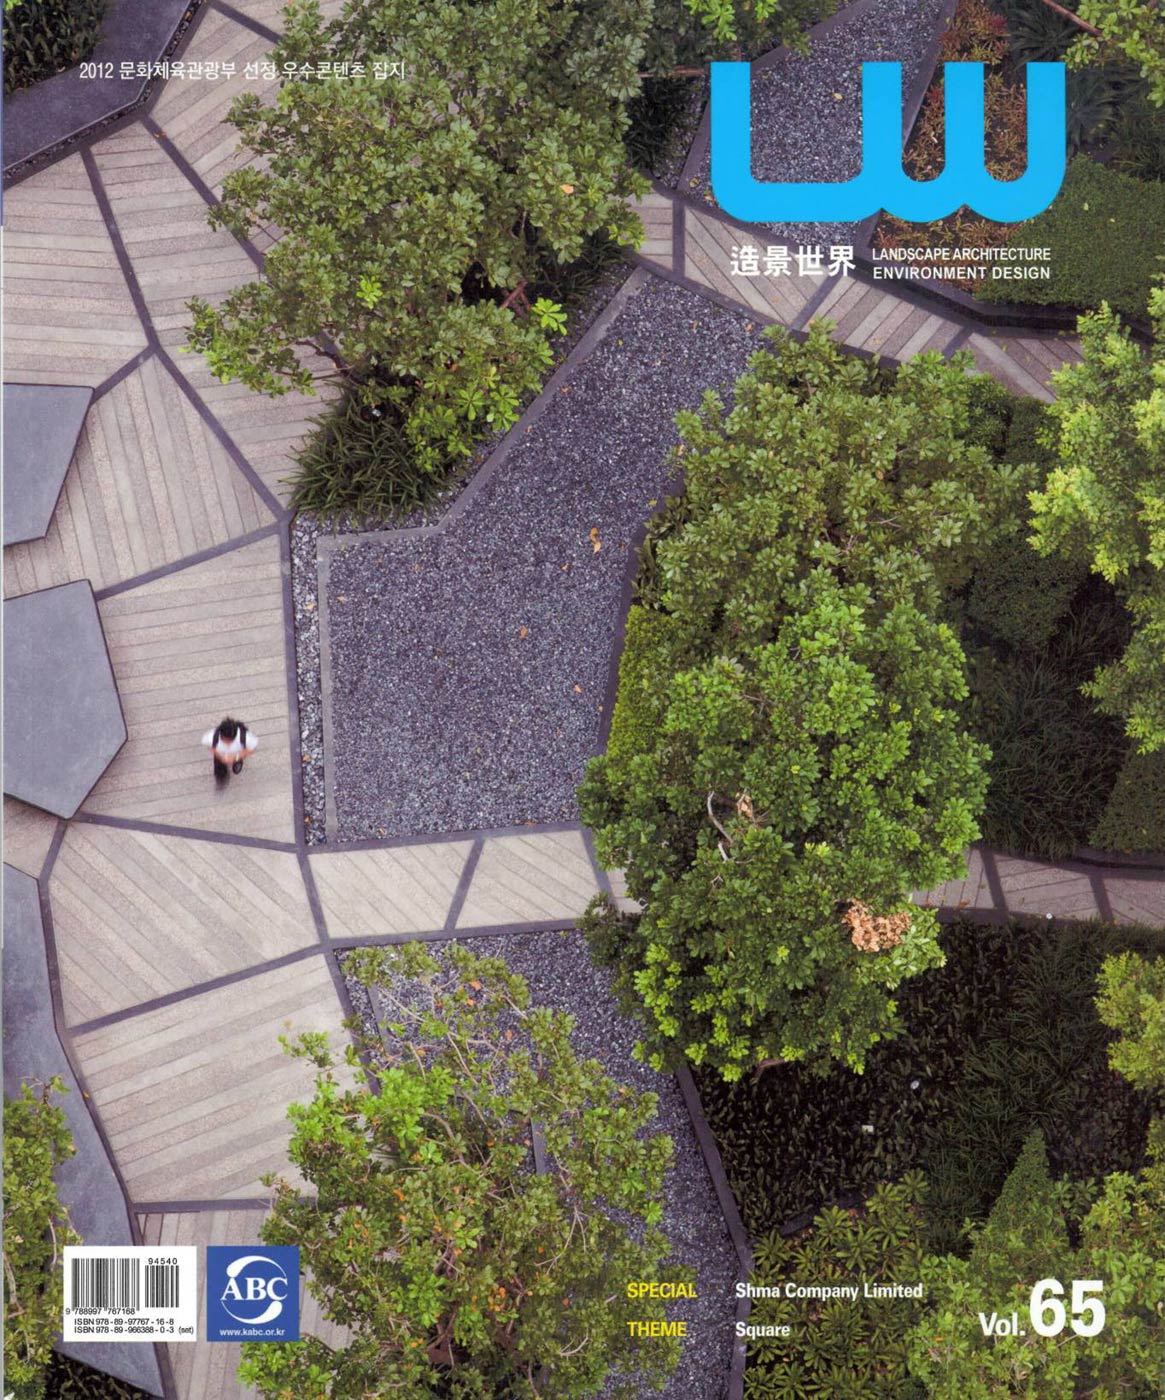 Our “Trump Towers” project is published on LW Magazine vol.65